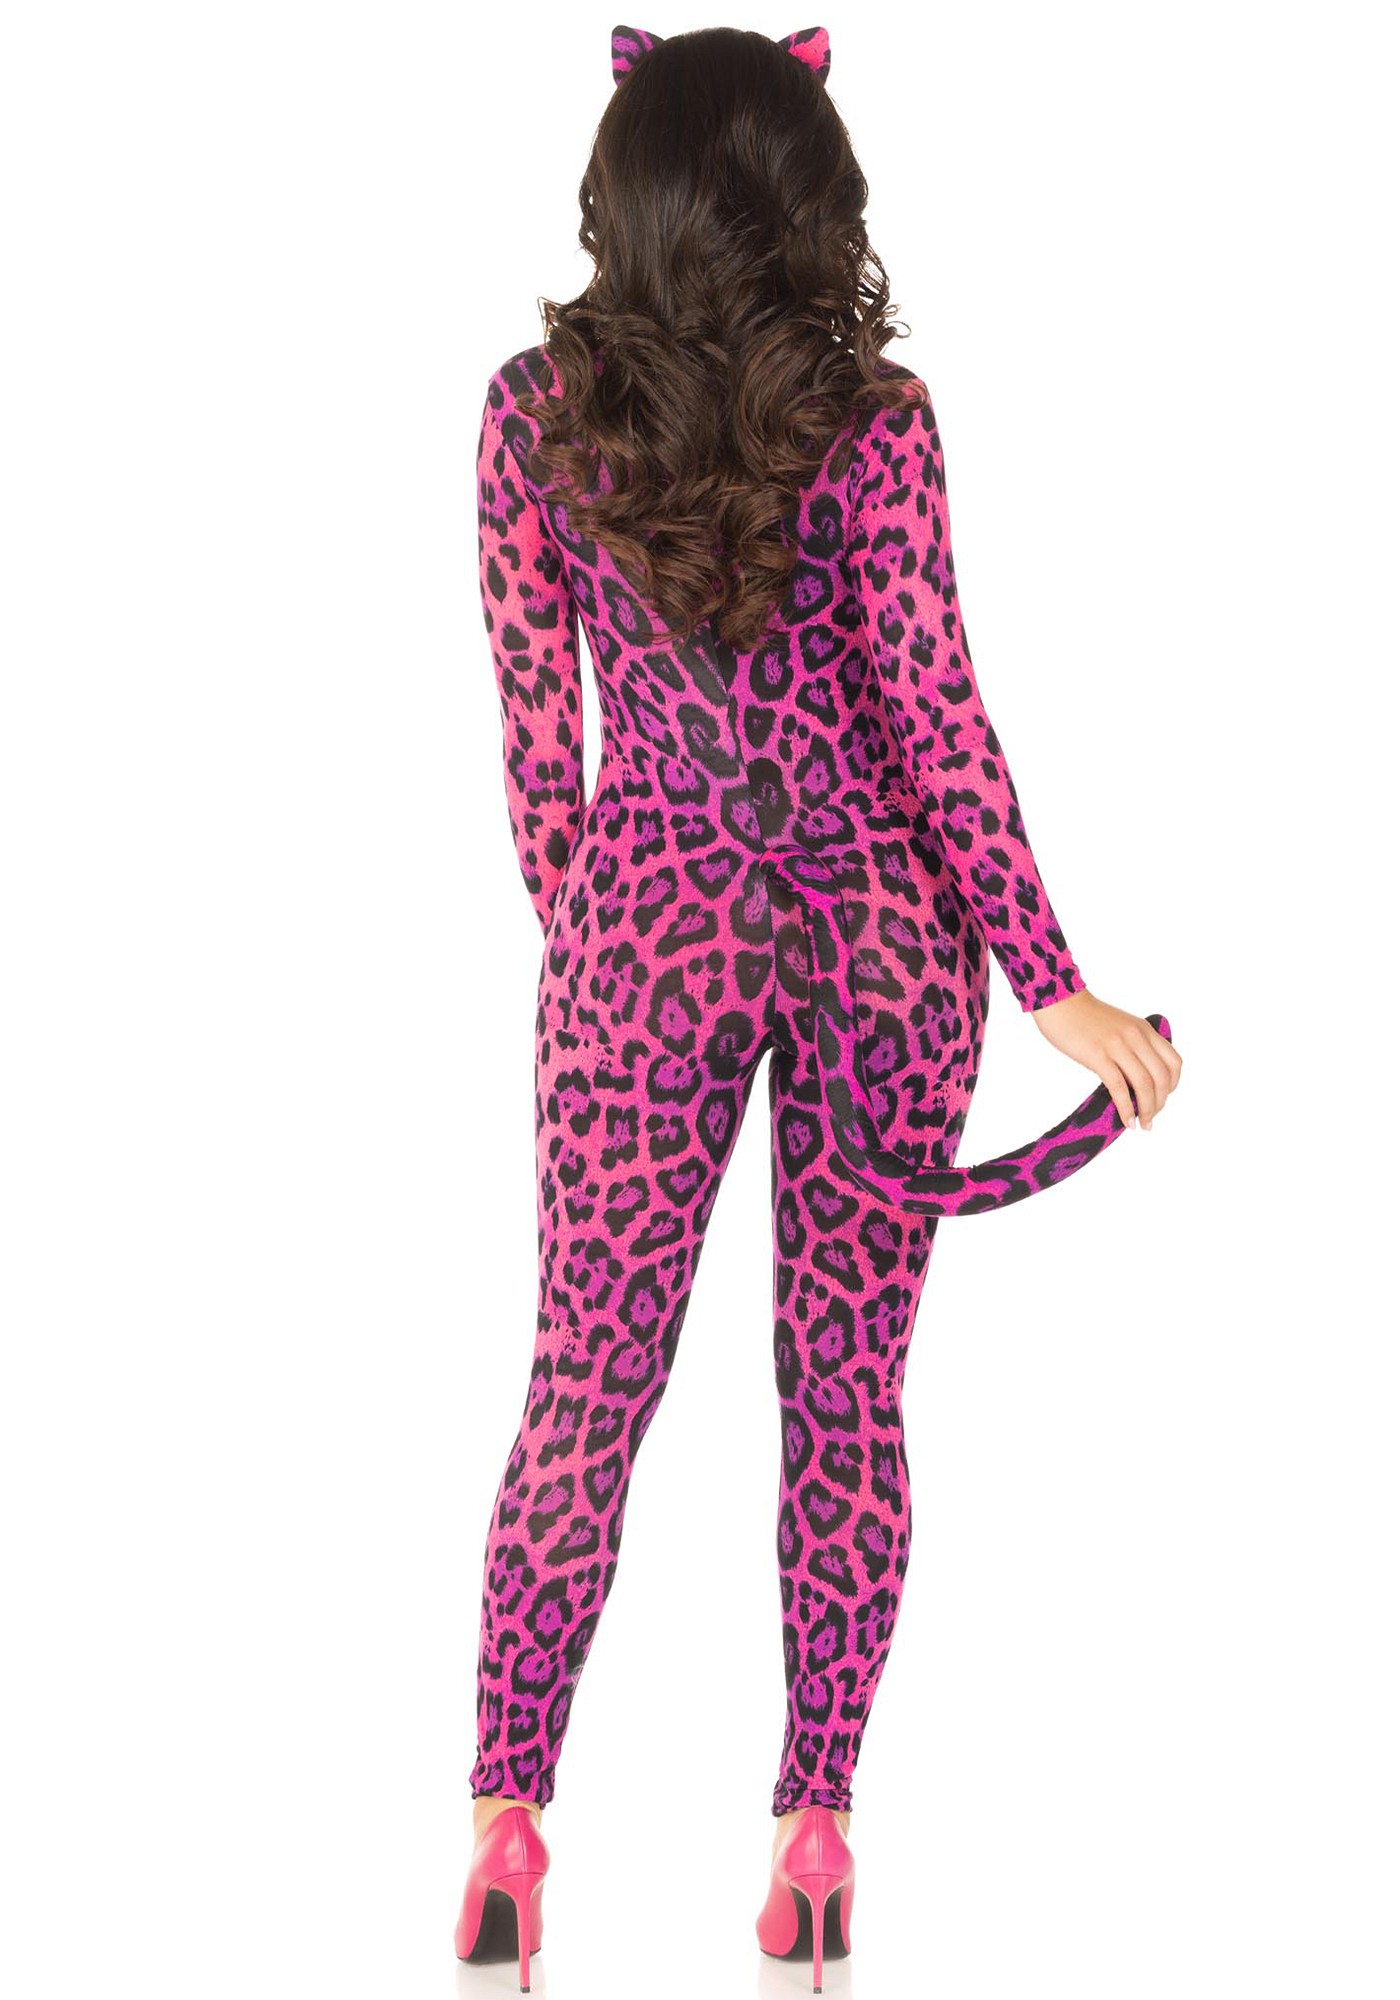 Pretty Pink Cougar Catsuit